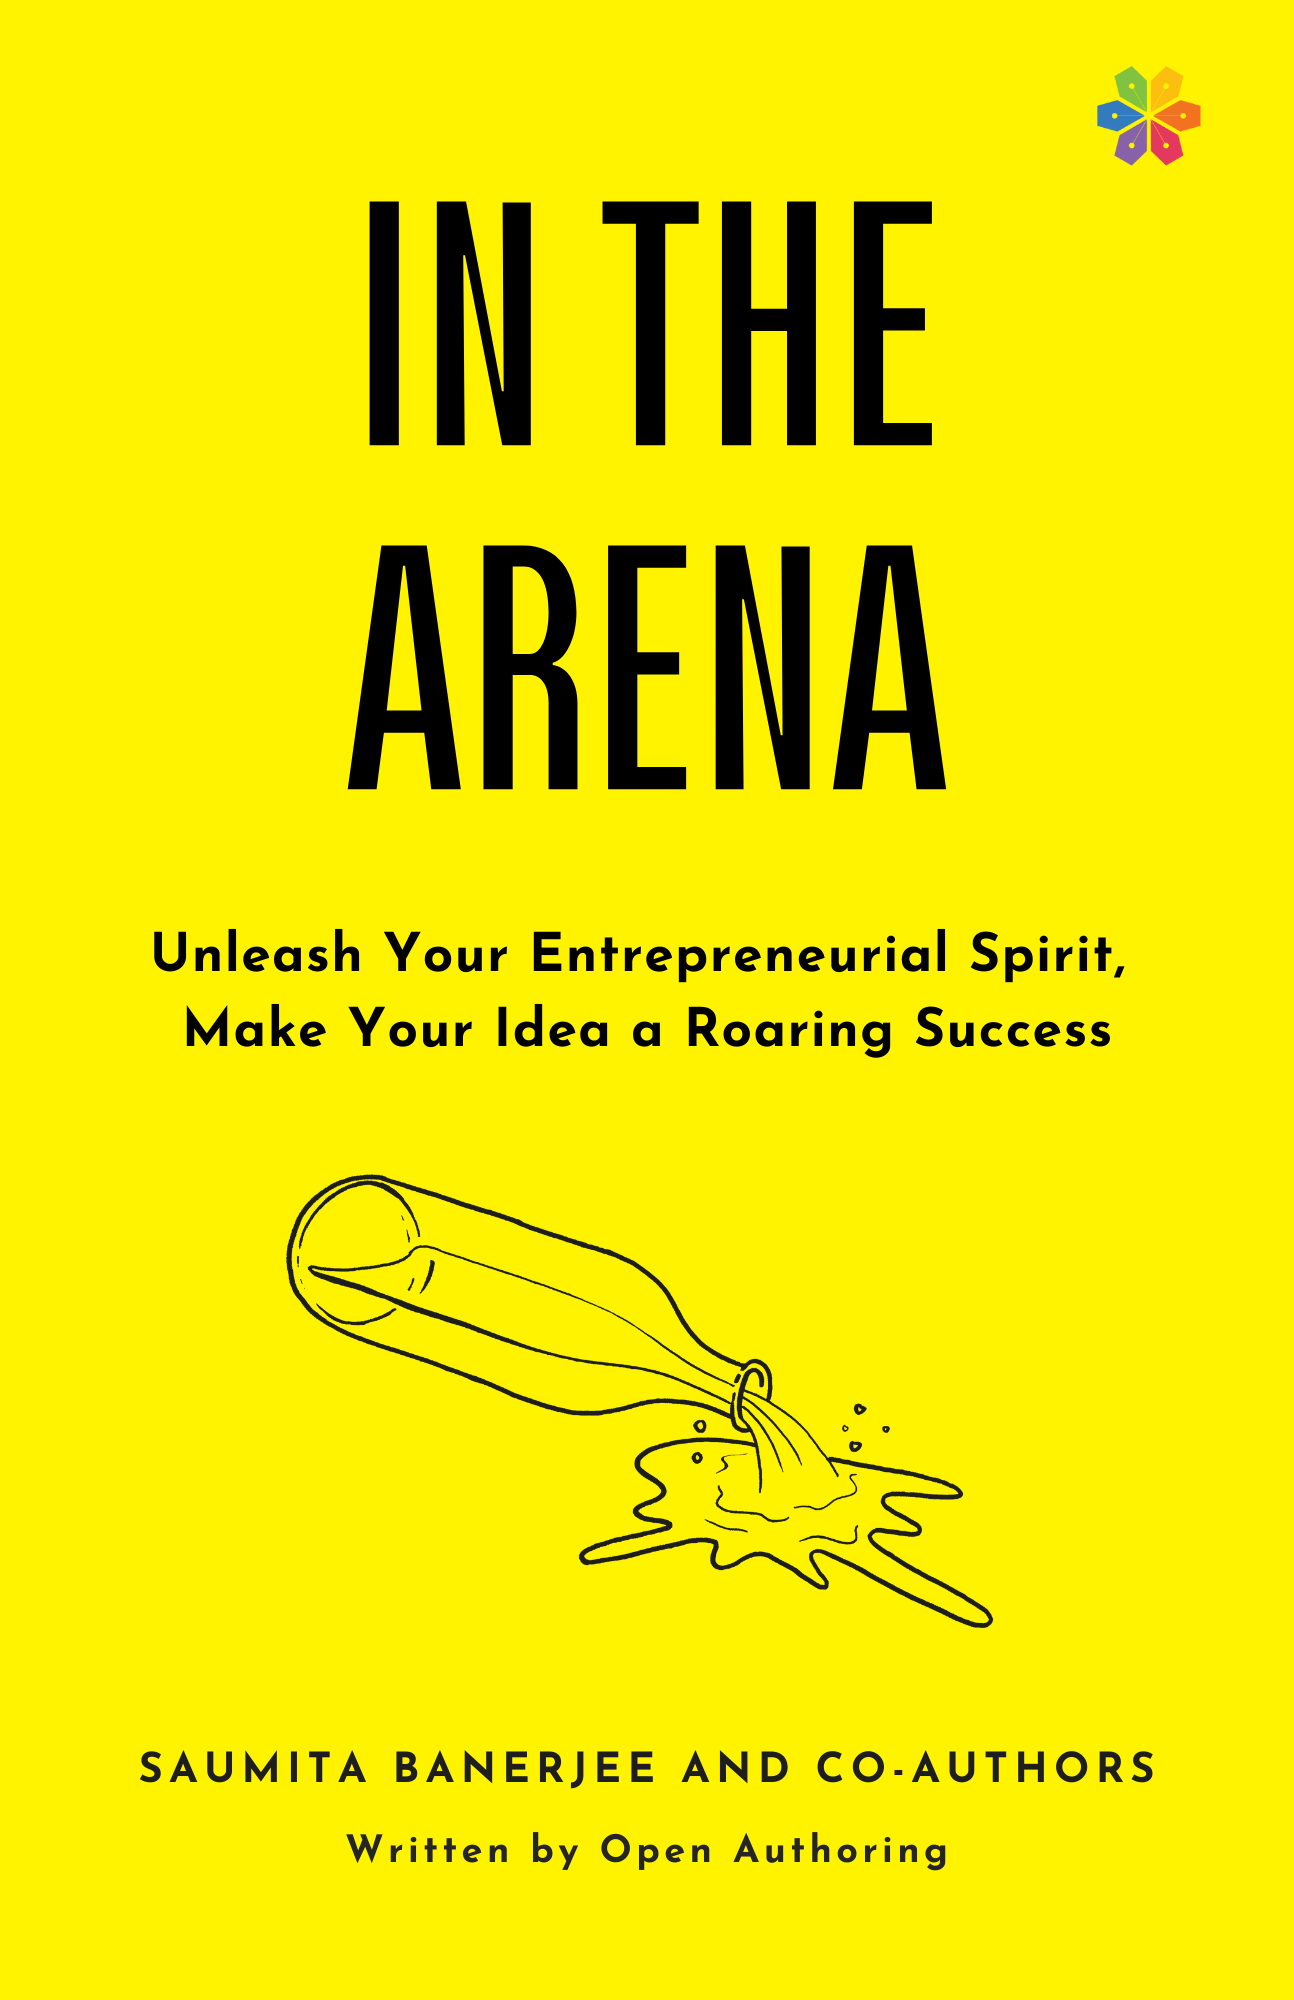 In the arena bookcover